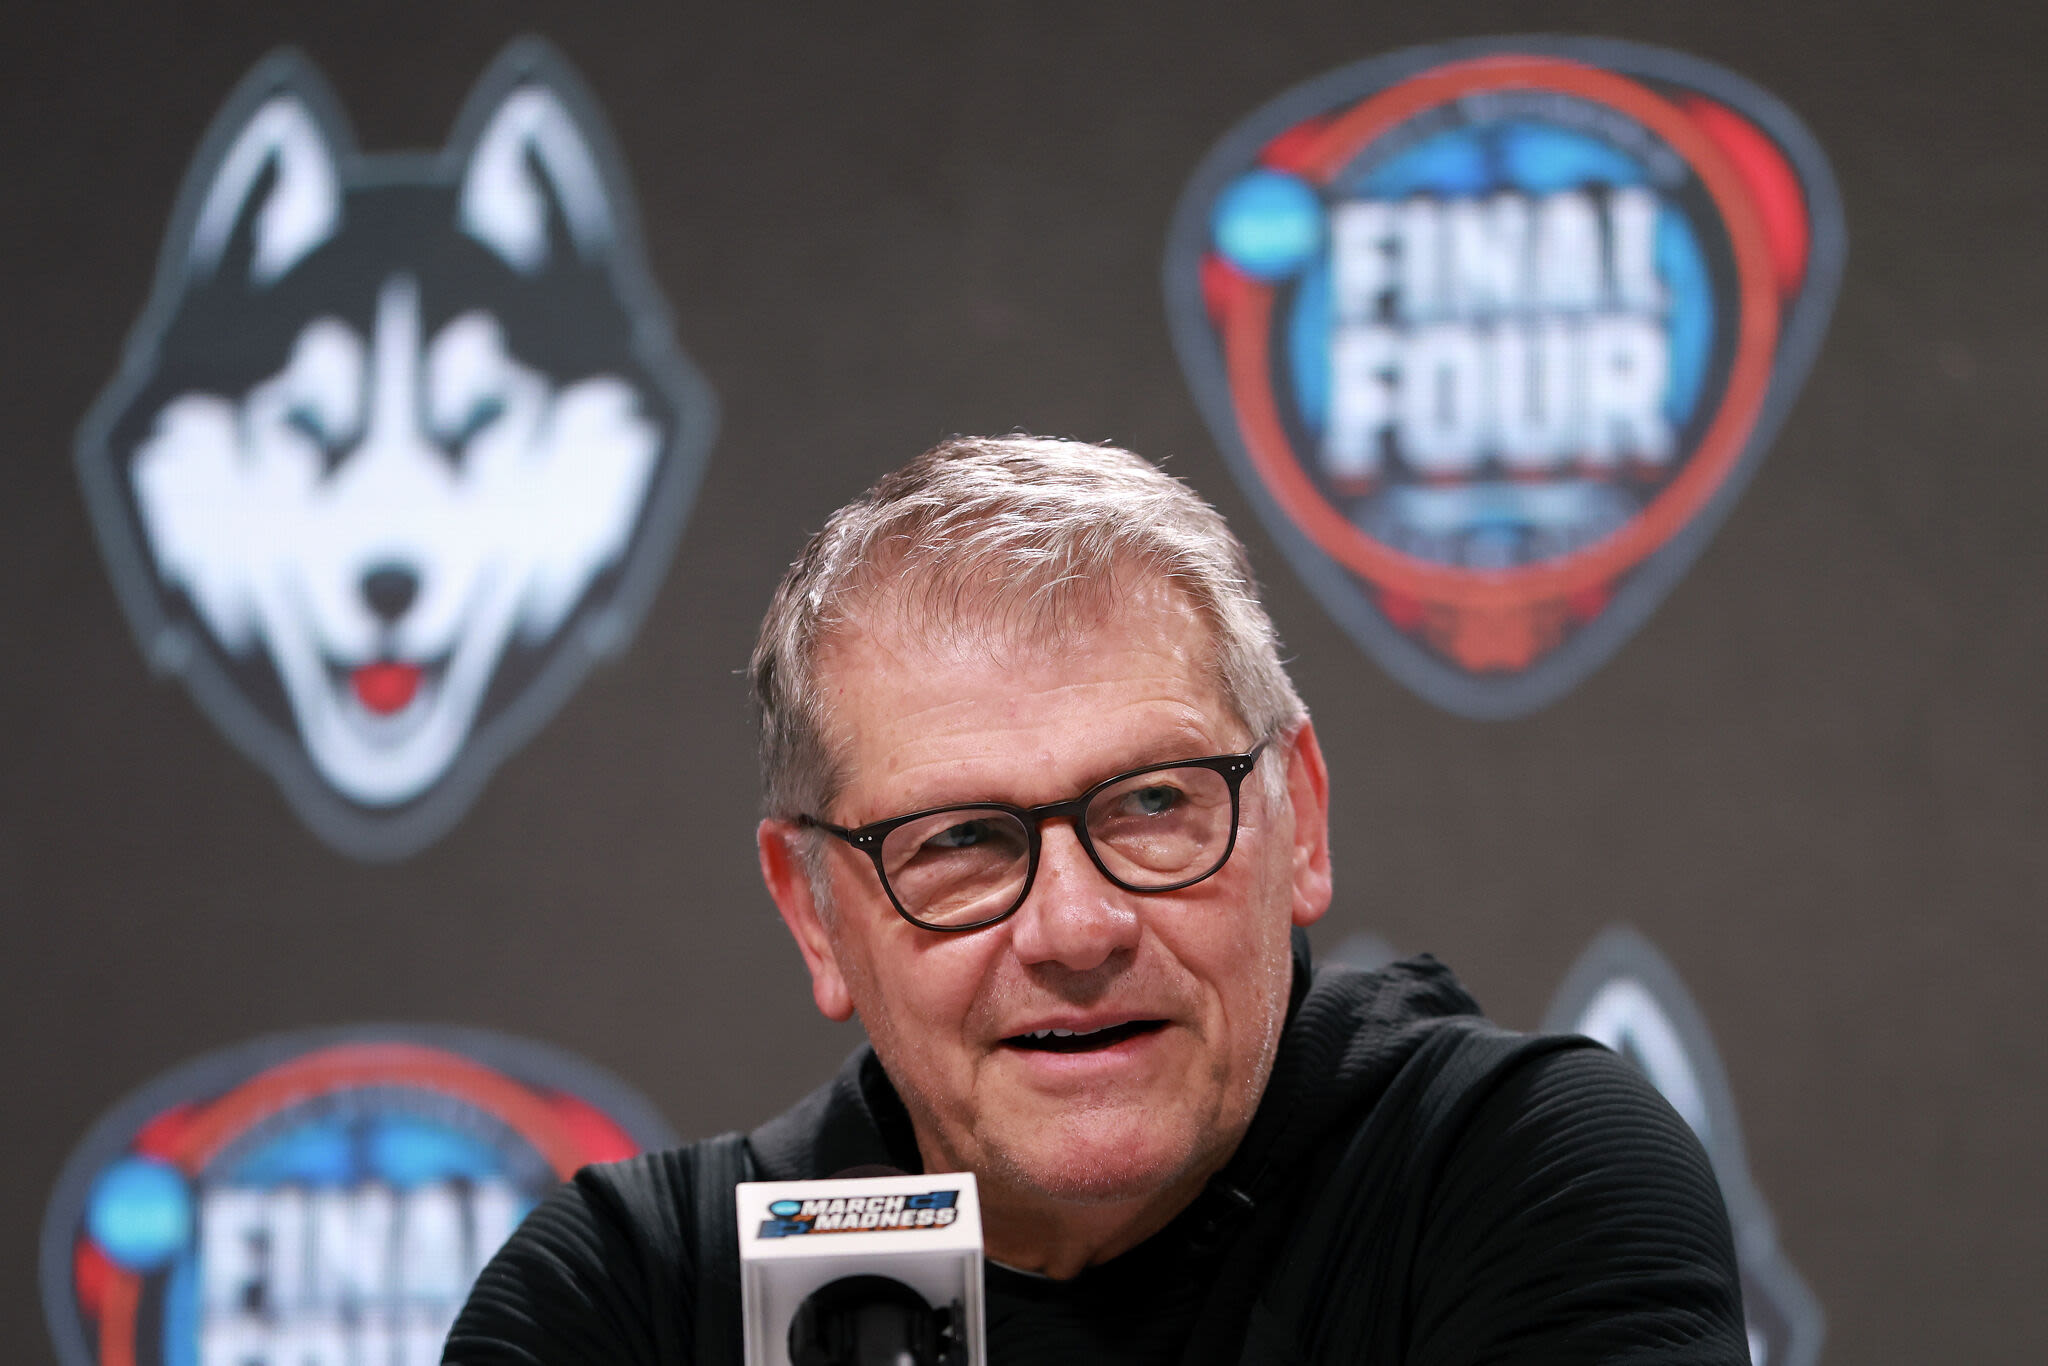 UConn women's basketball team will have deep roster. Here's how Geno Auriemma could manage minutes